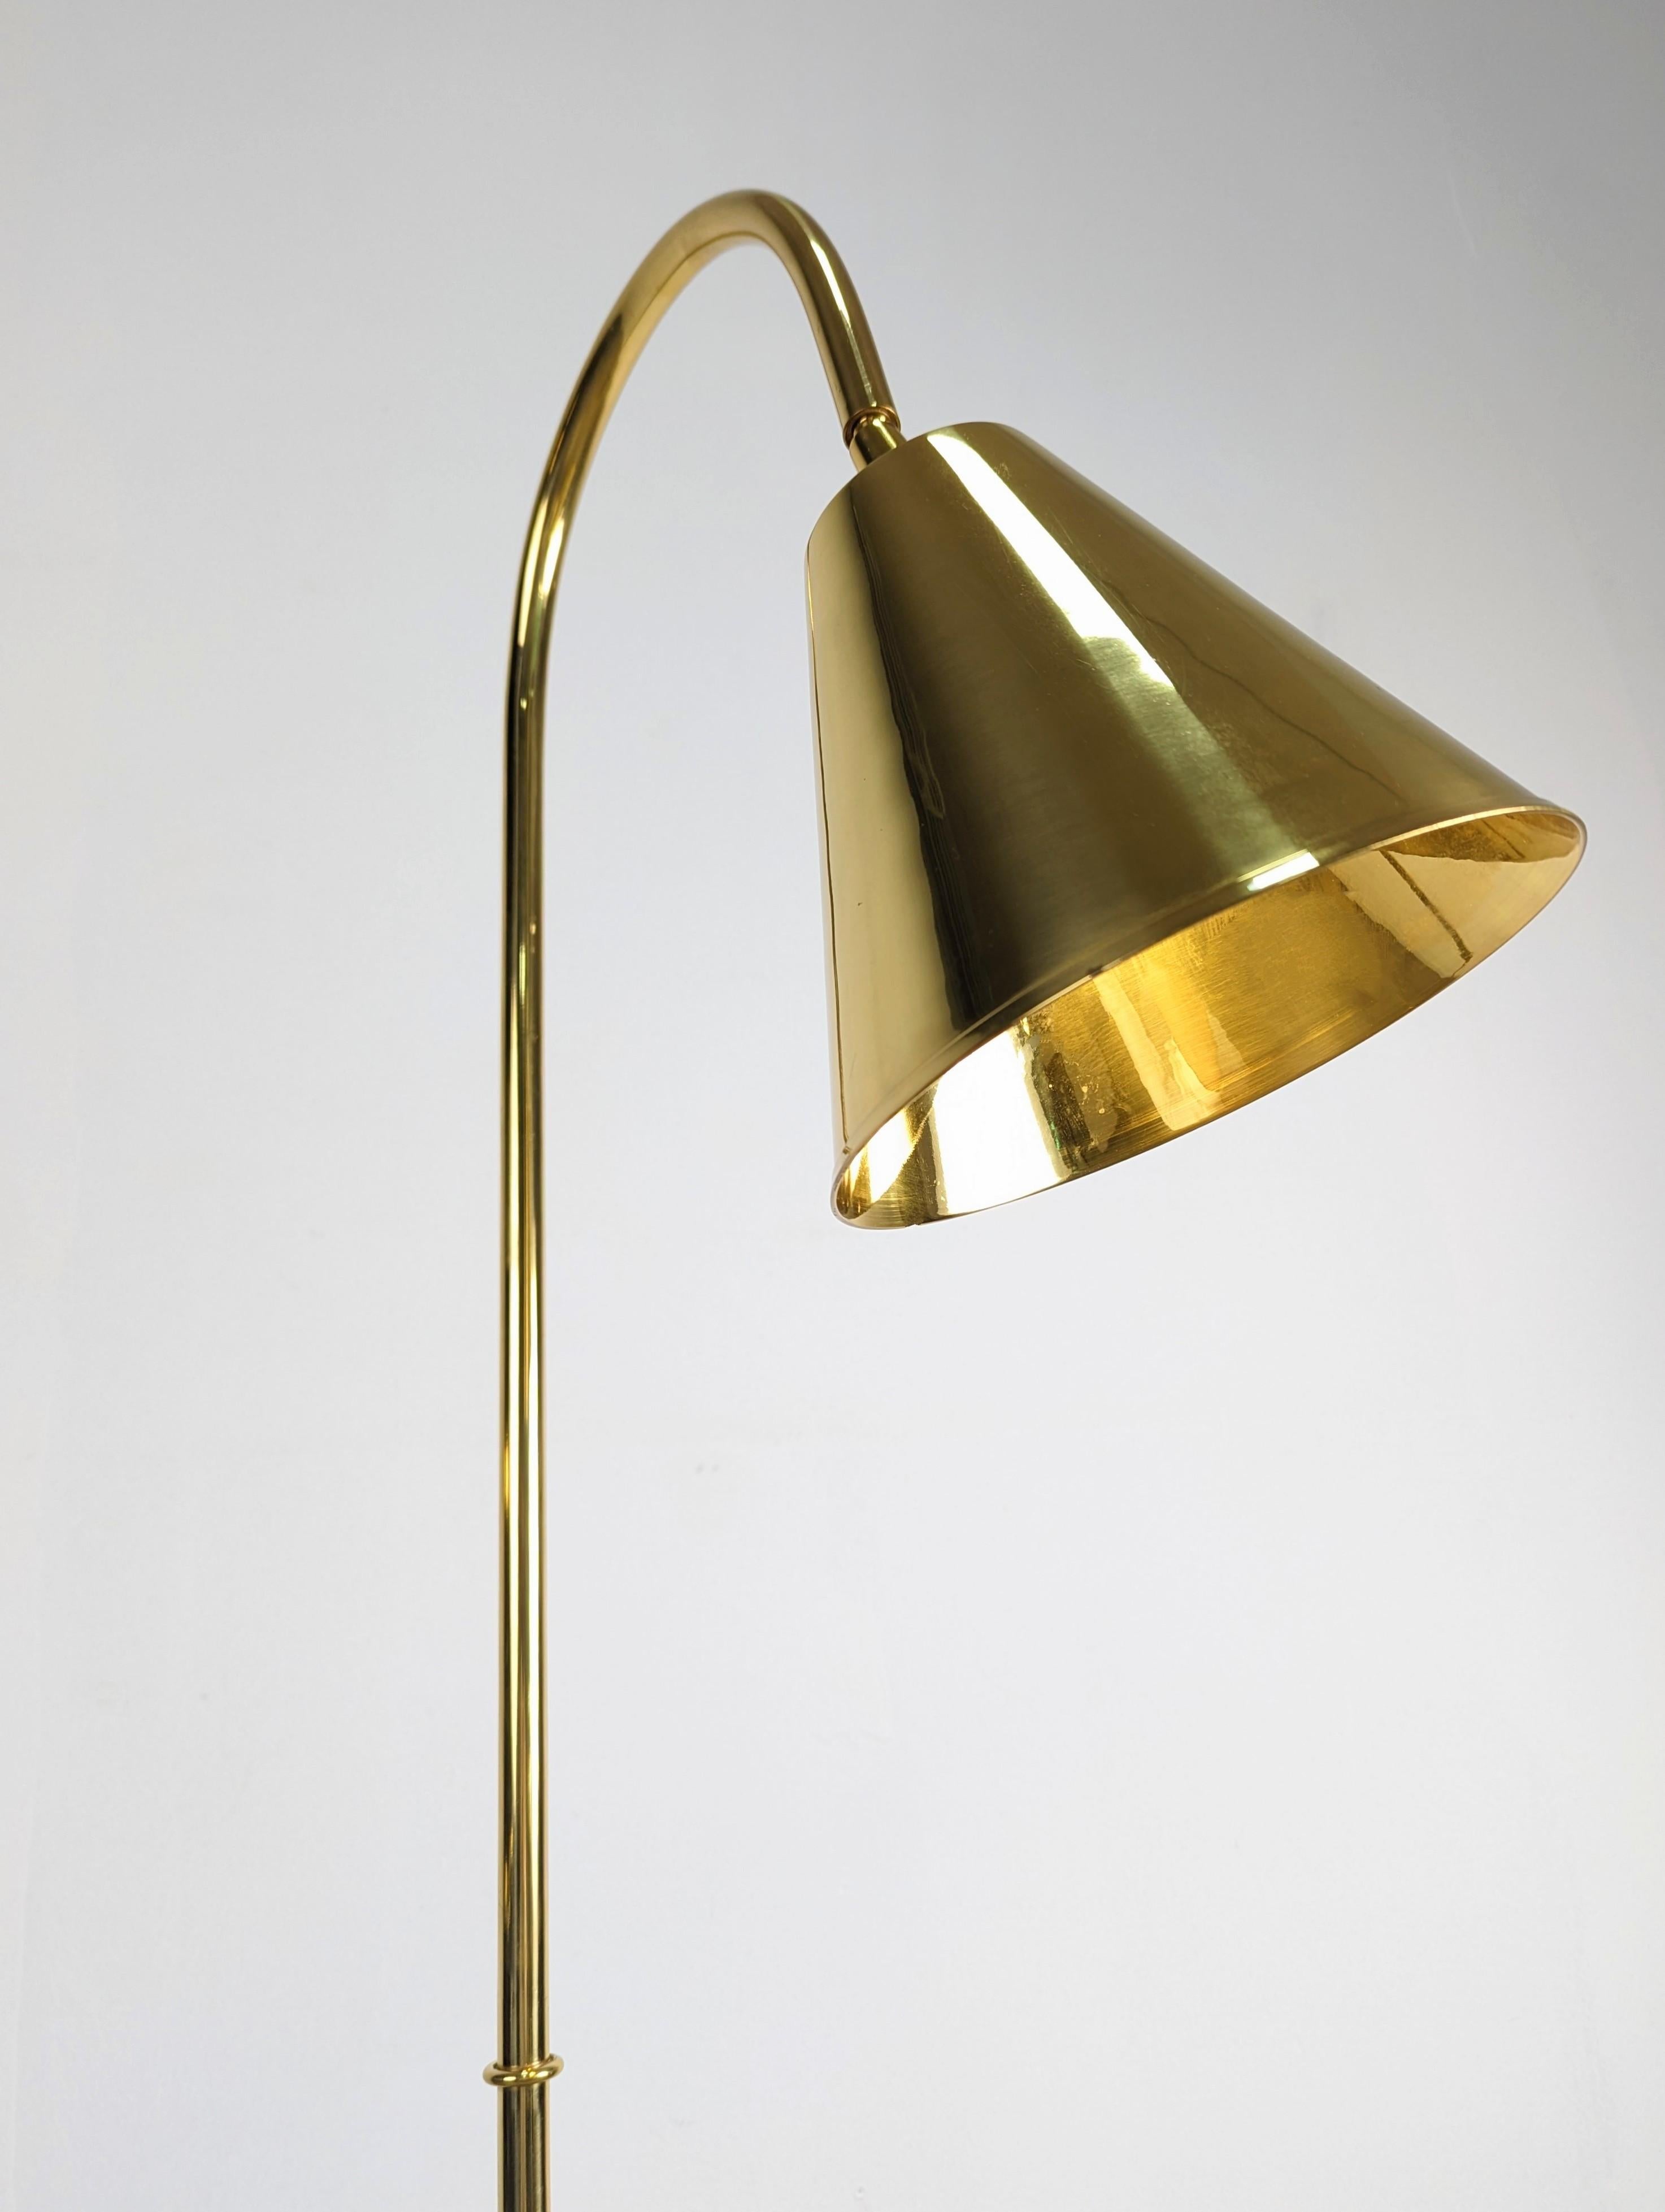 Fantastic floor lamp designed by the great French architect and designer Jacques Adnet made in brass by the prestigious Valentí house in the mid-century.